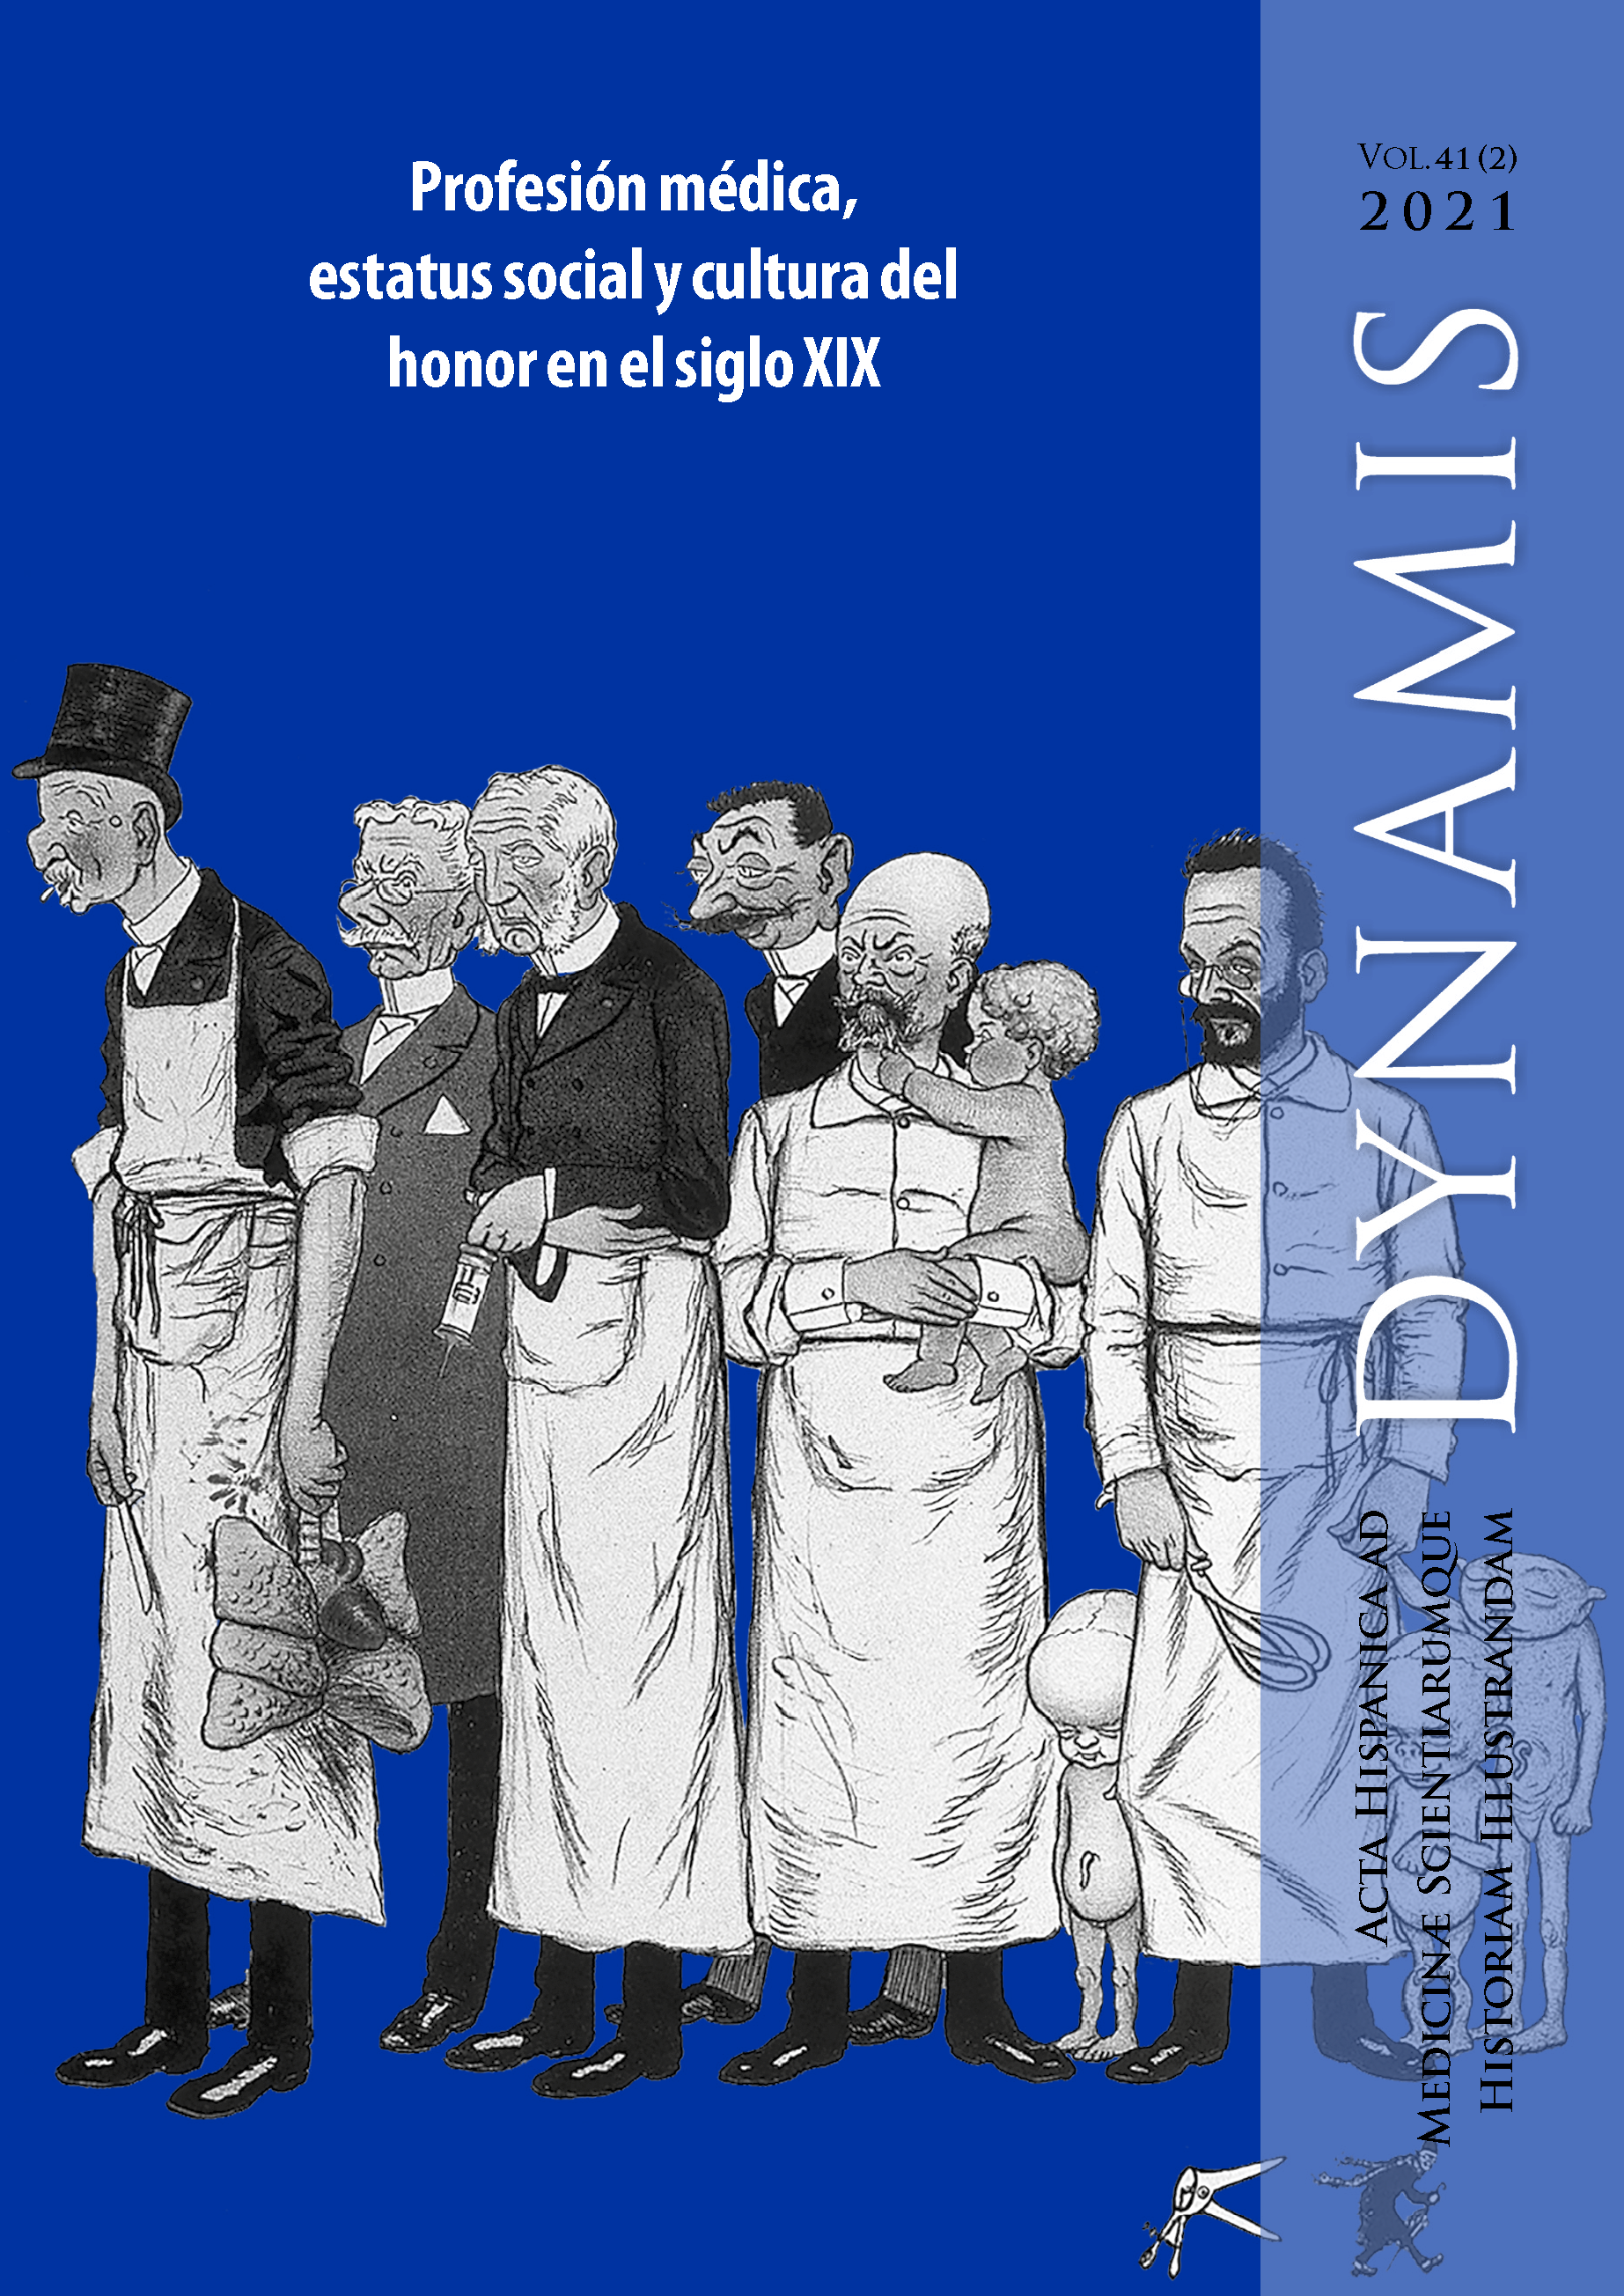 					View Vol. 41 No. 2 (2021): Medical Profession, Social Status, and Culture of Honor in the 19Th Century
				